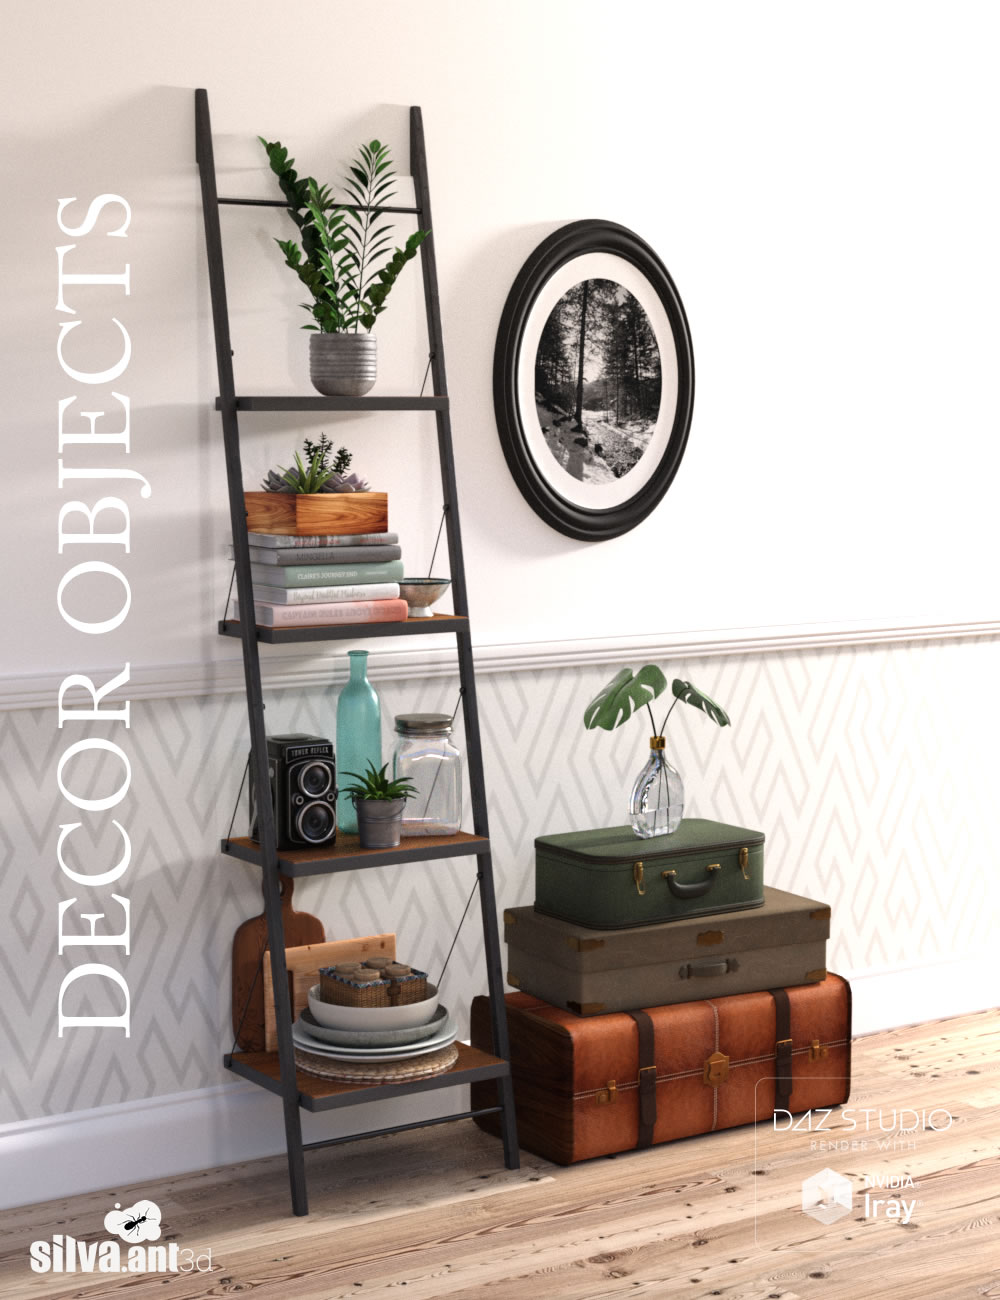 Decor Objects by: SilvaAnt3d, 3D Models by Daz 3D